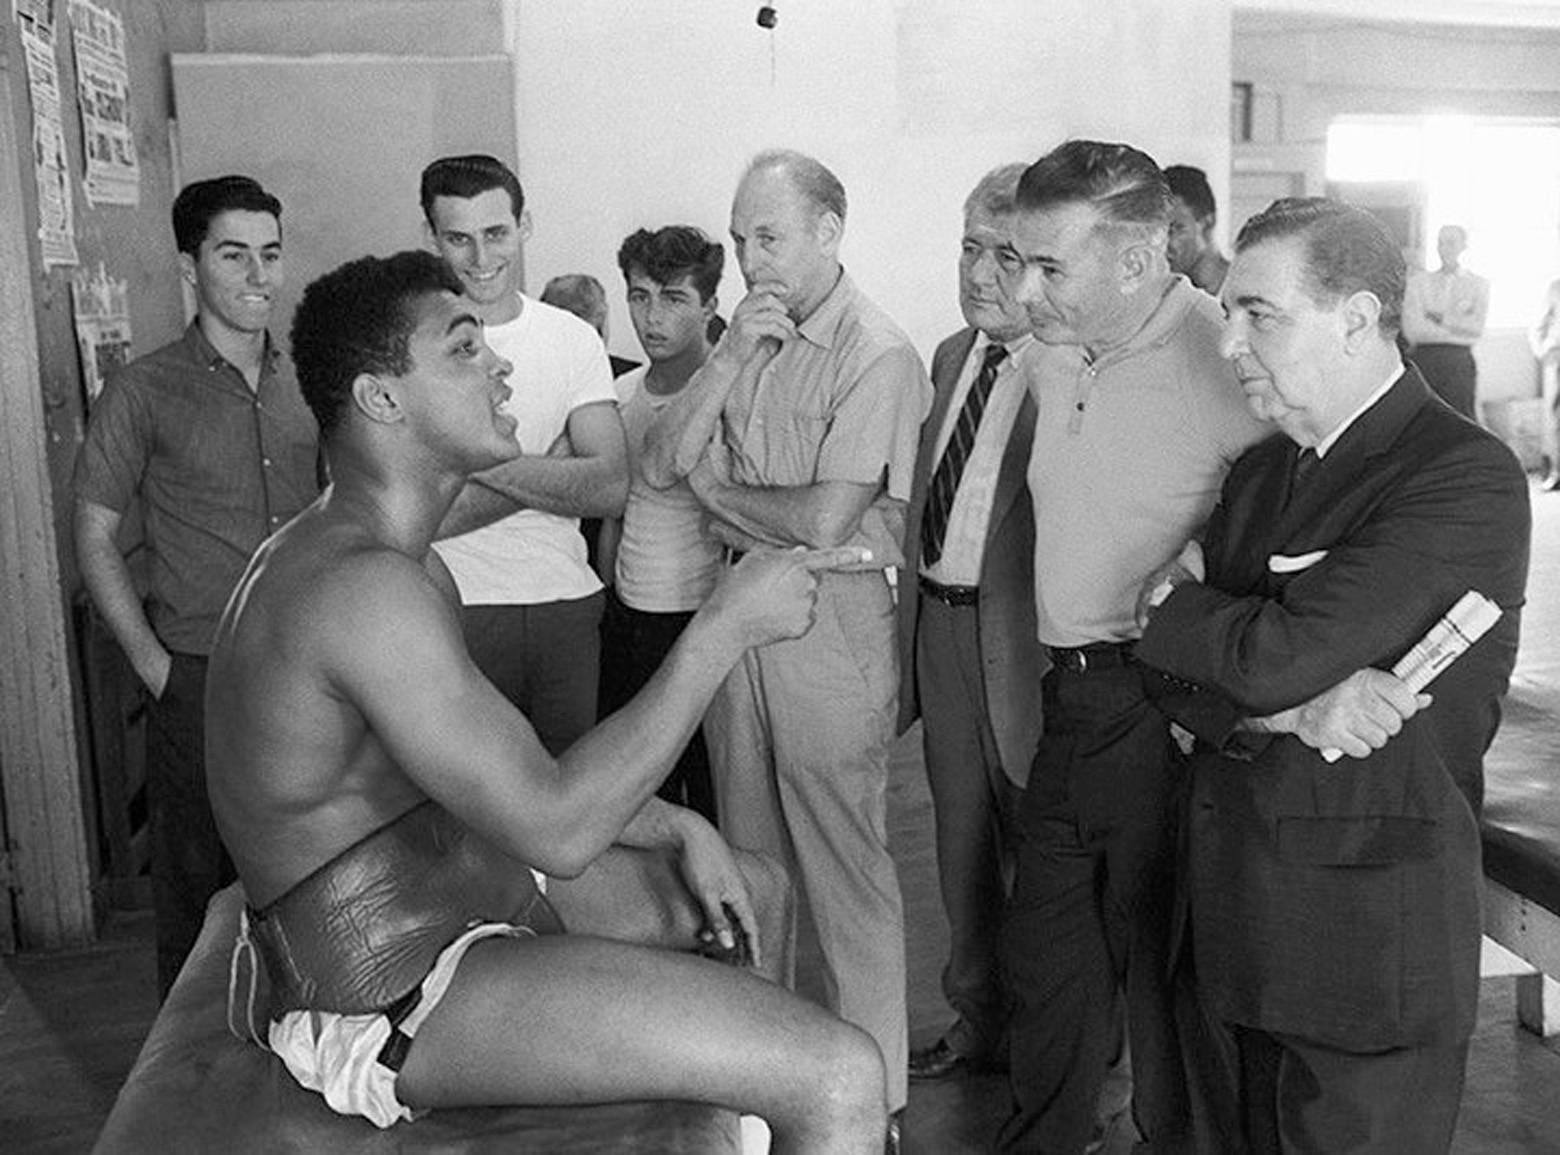 Marvin Newman Figurative Photograph - Cassius Clay with Newspaper Sports Writers, Black & White Photography